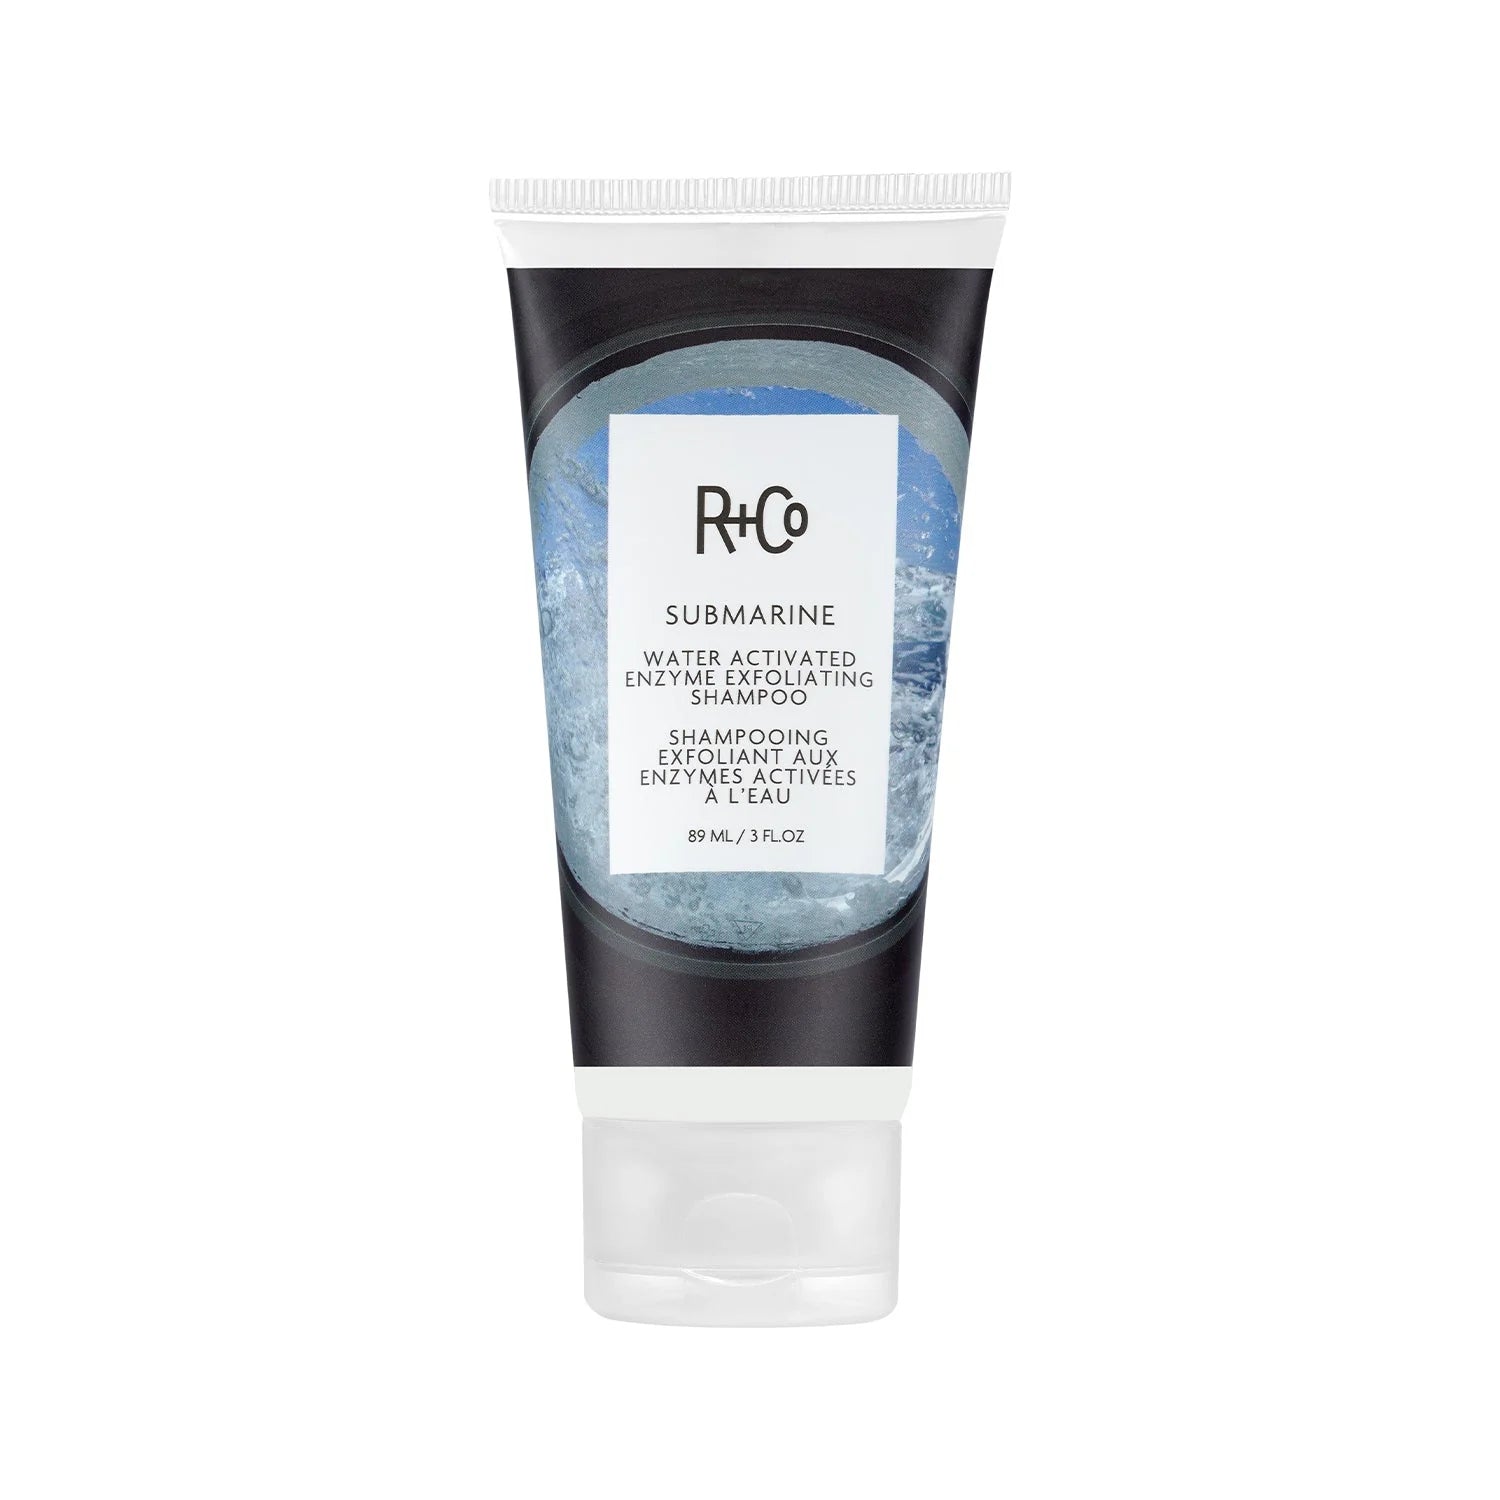 R+Co Submarine water activated enzyme exfoliating shampoo 89ml